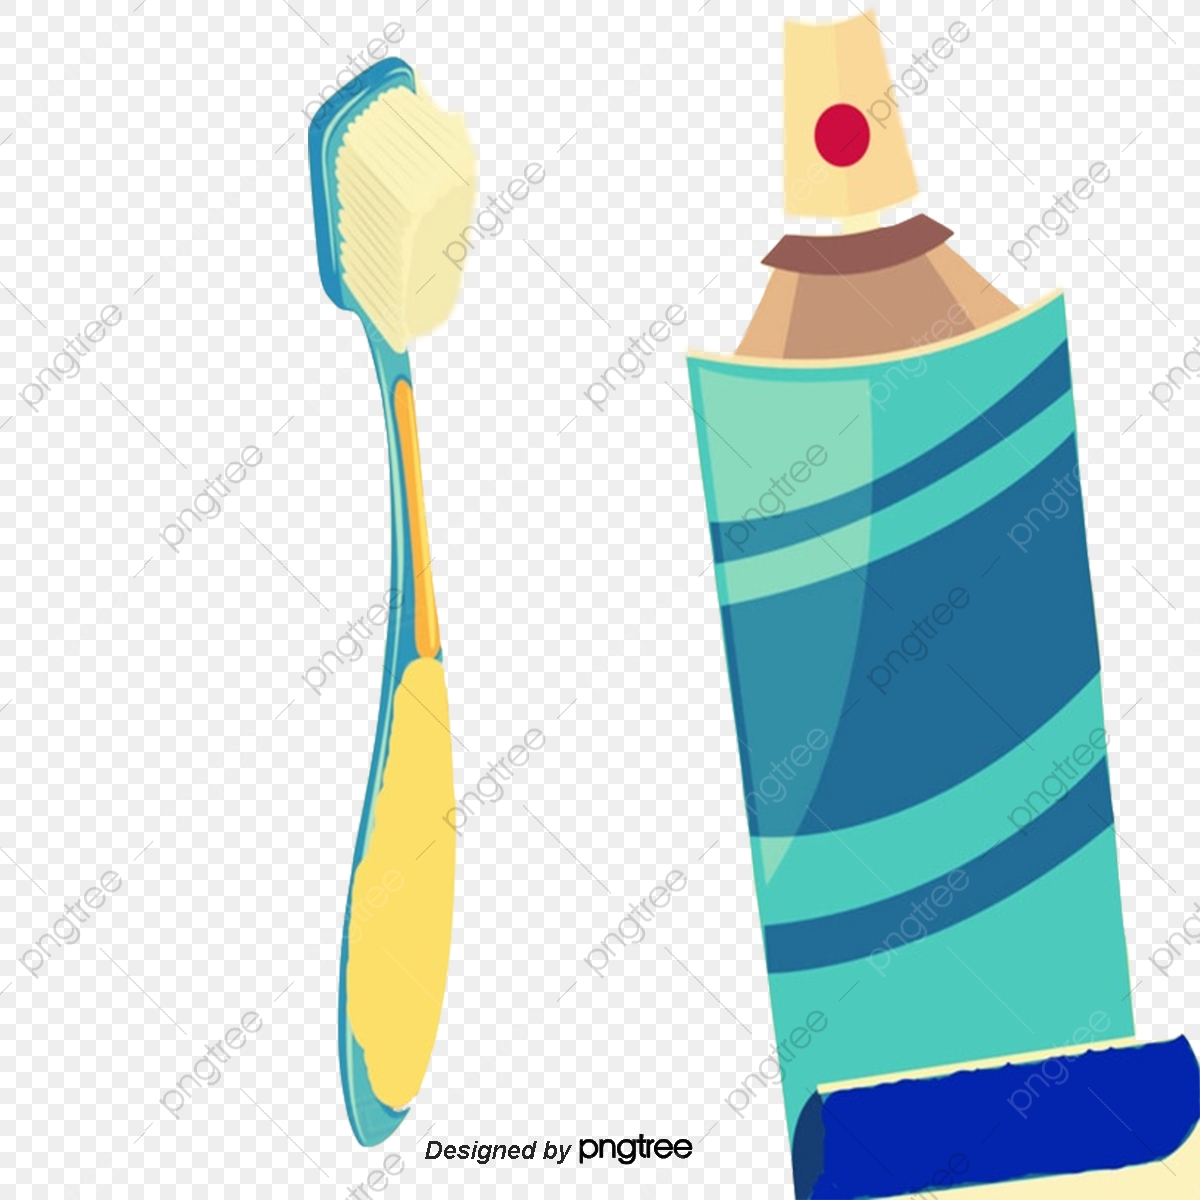 Toothpaste Toothbrush, Toothpaste, Toothbrush, Brush PNG and.